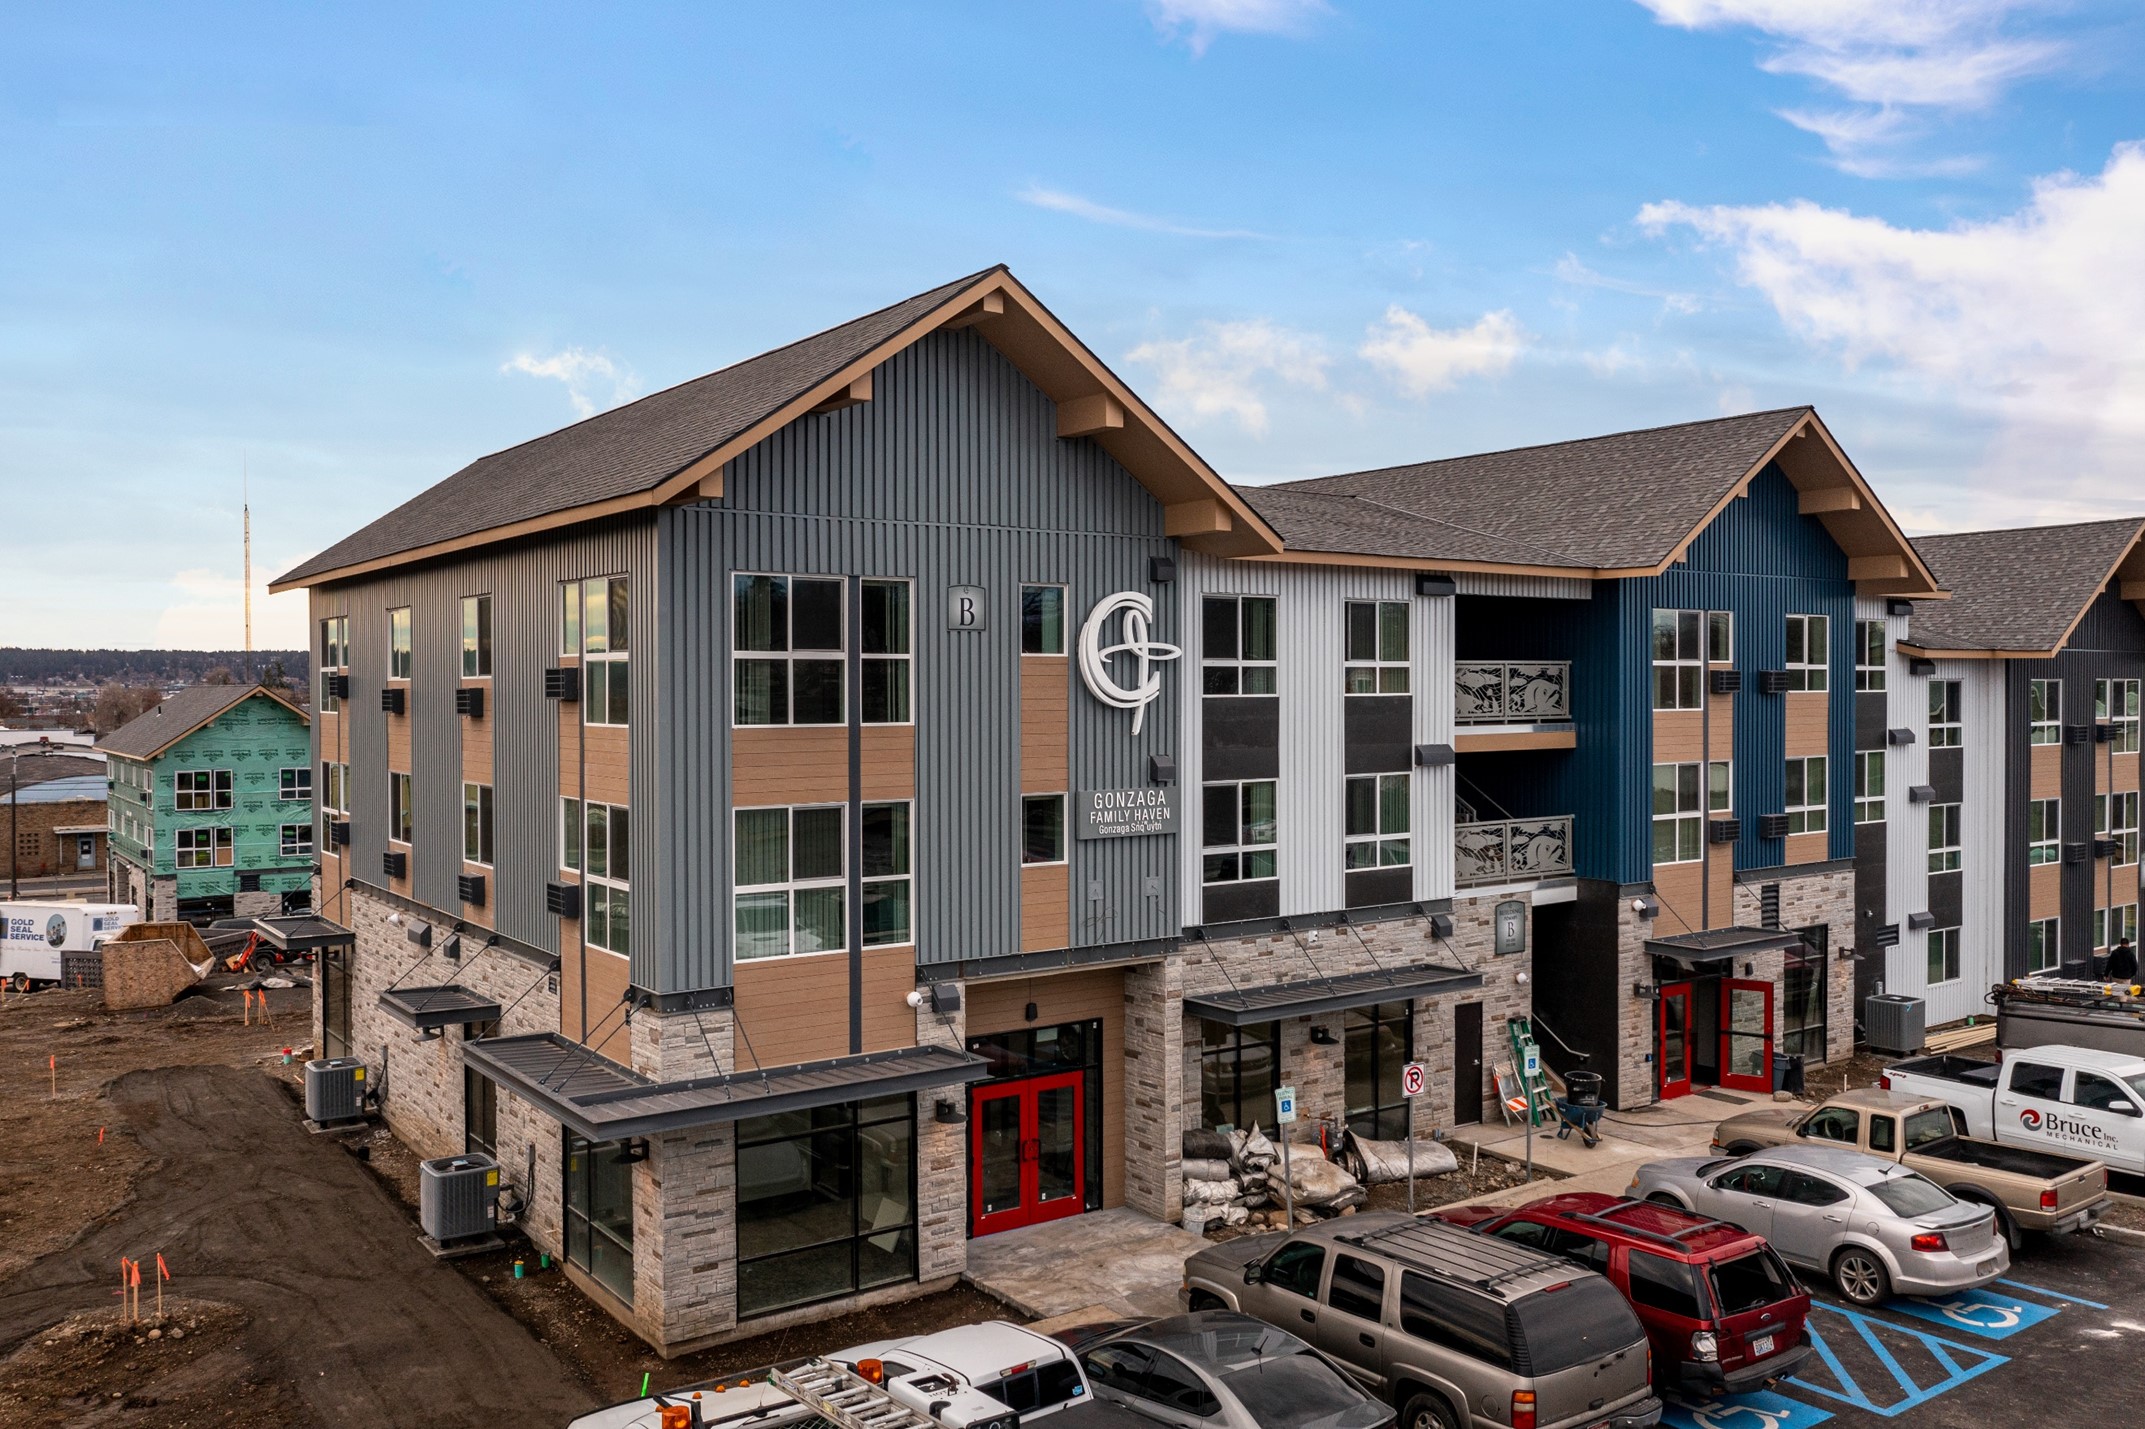 Gonzaga Family Haven, an affordable housing complex built by Catholic Charities of Eastern Washington, opened in 2021 and includes 73 units of permanent supportive housing. (Courtesy of Catholic Charities of Eastern Washington) 